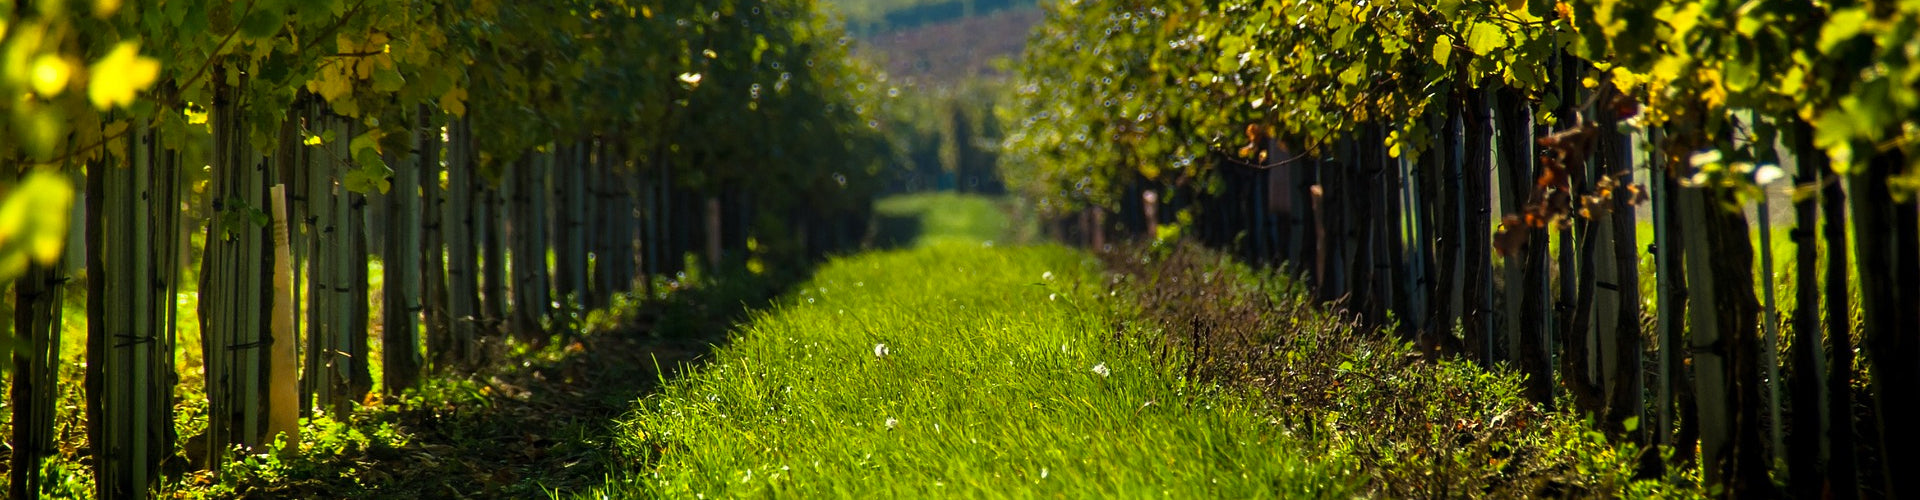 Organic Vines in Vineyards with Crop Cover